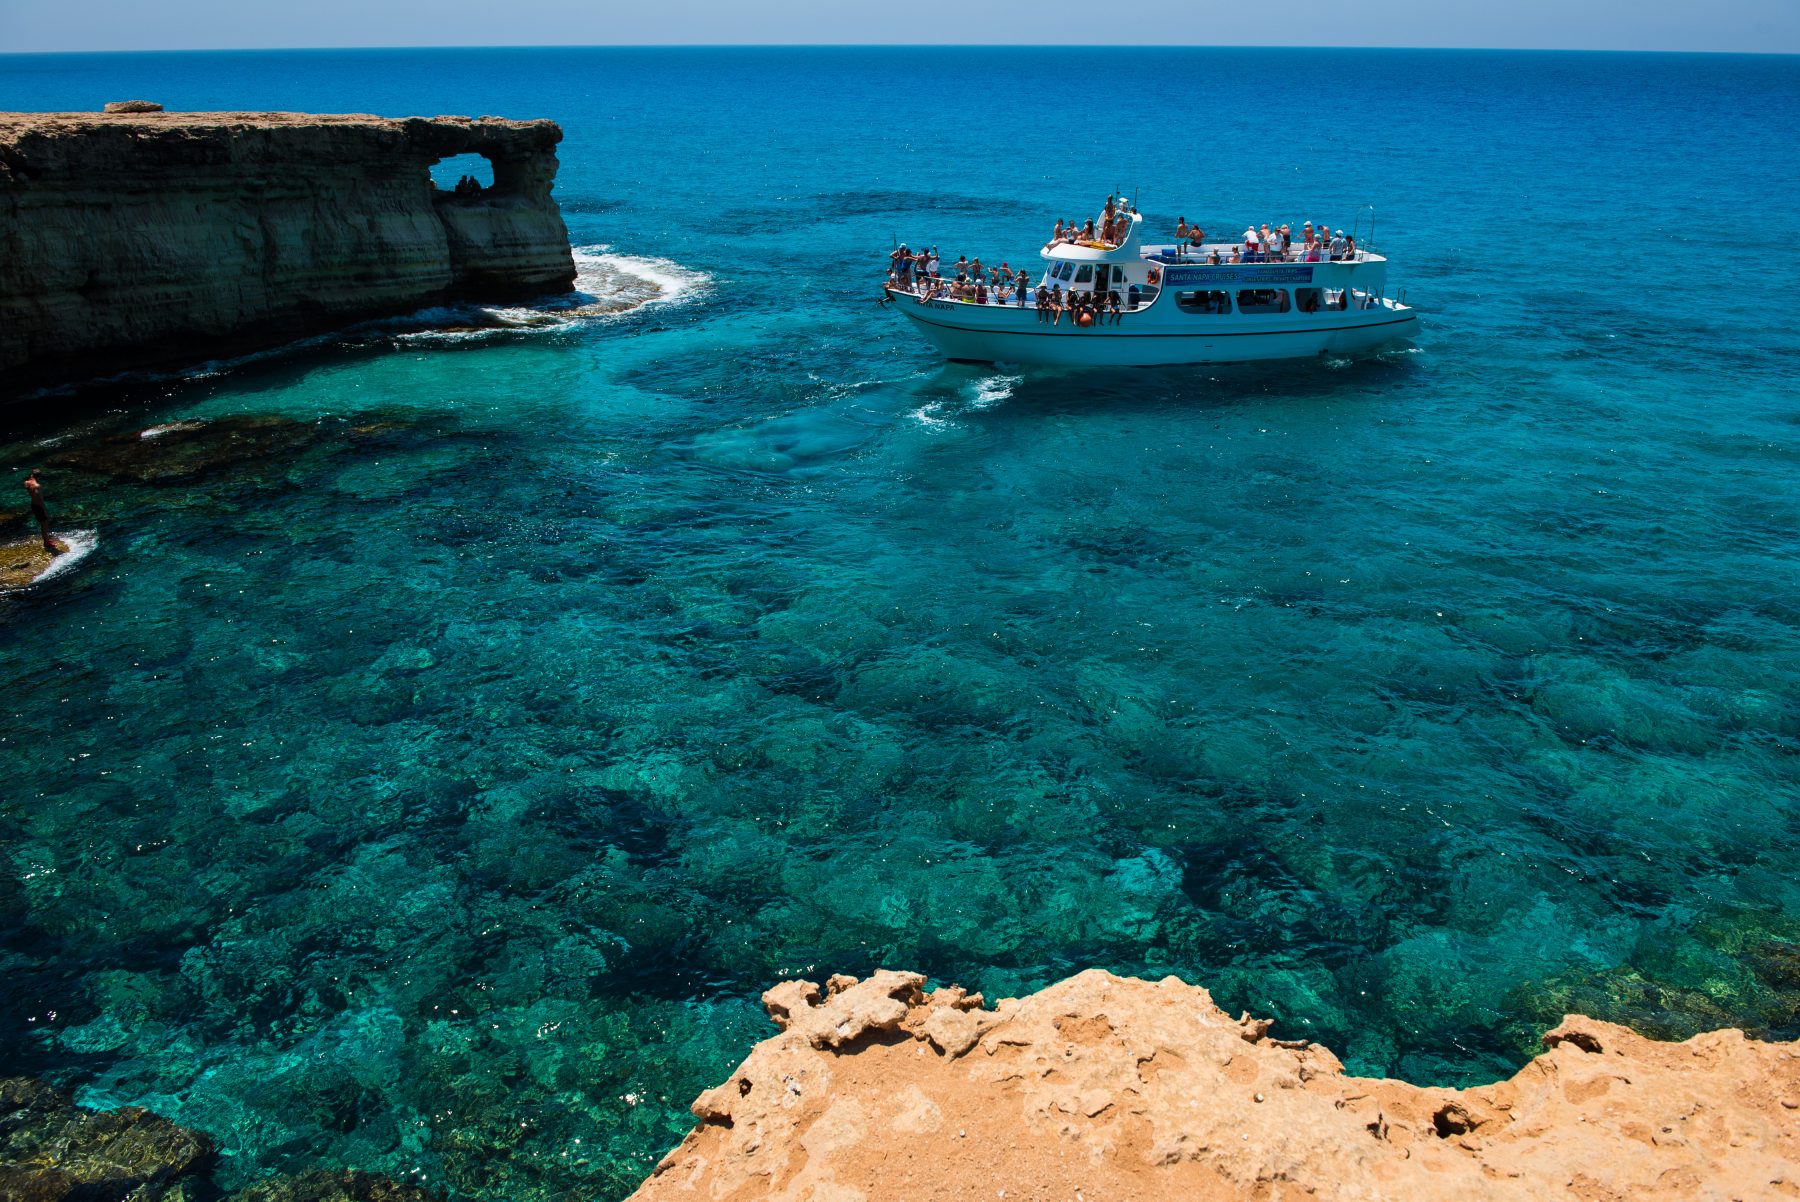 The Best Location For Instagramming Incentives In Cyprus - Littoral caves